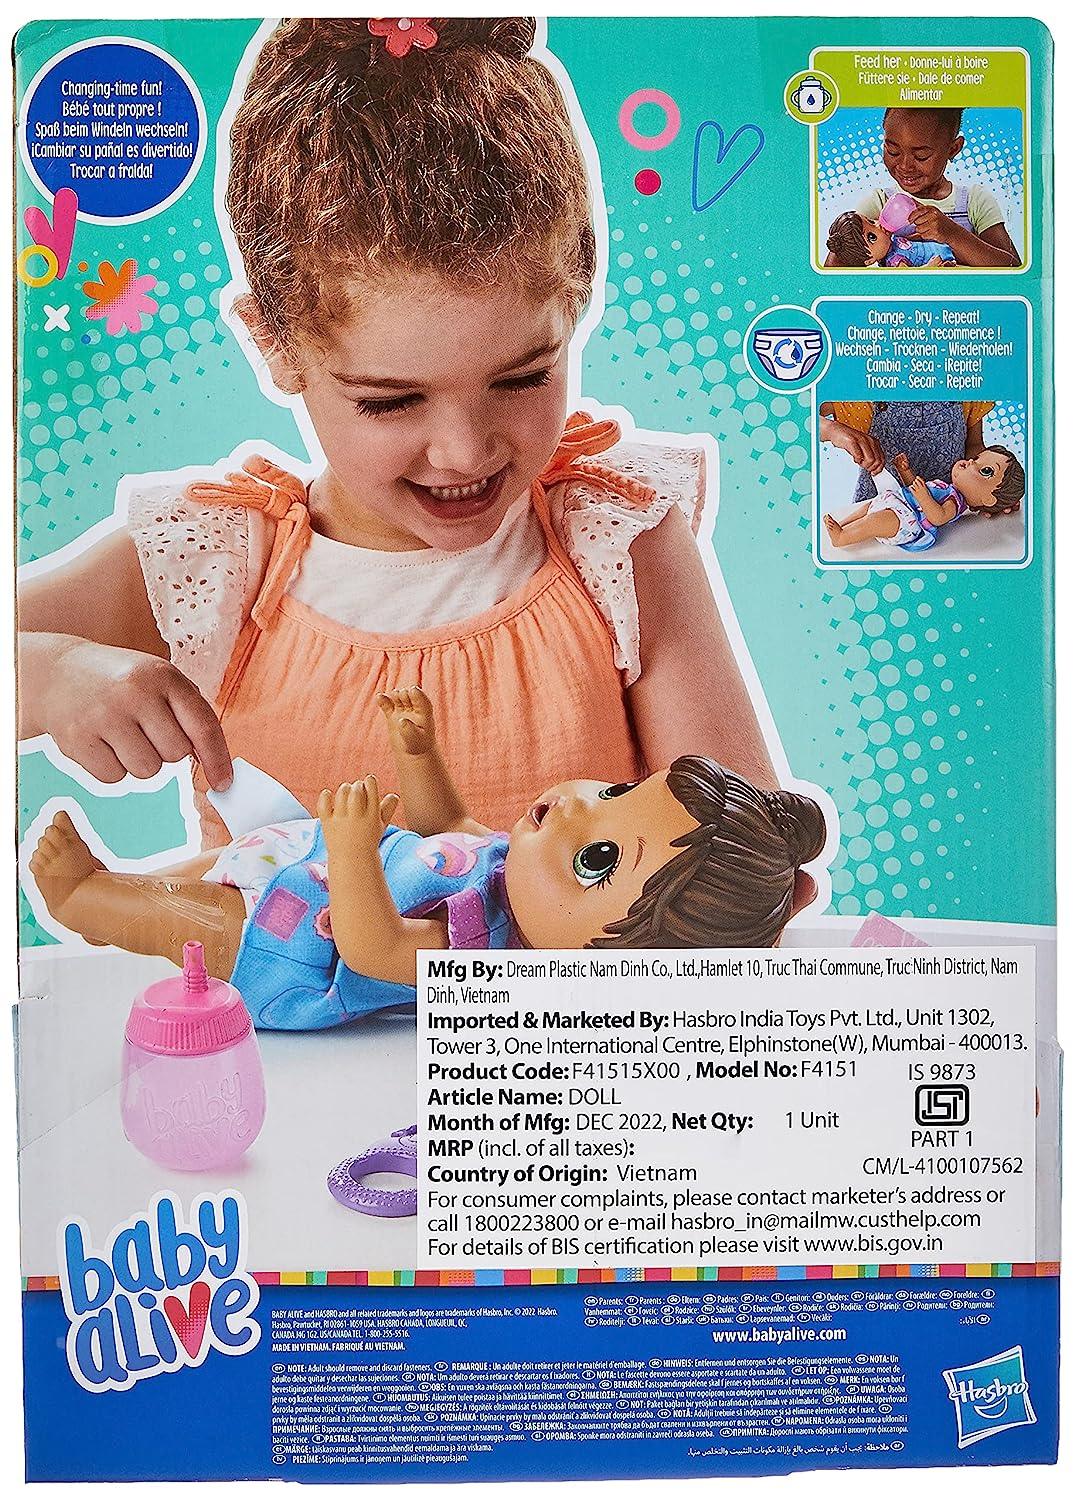 Baby doll playsets - Baby dolls & accessories - Categories - www